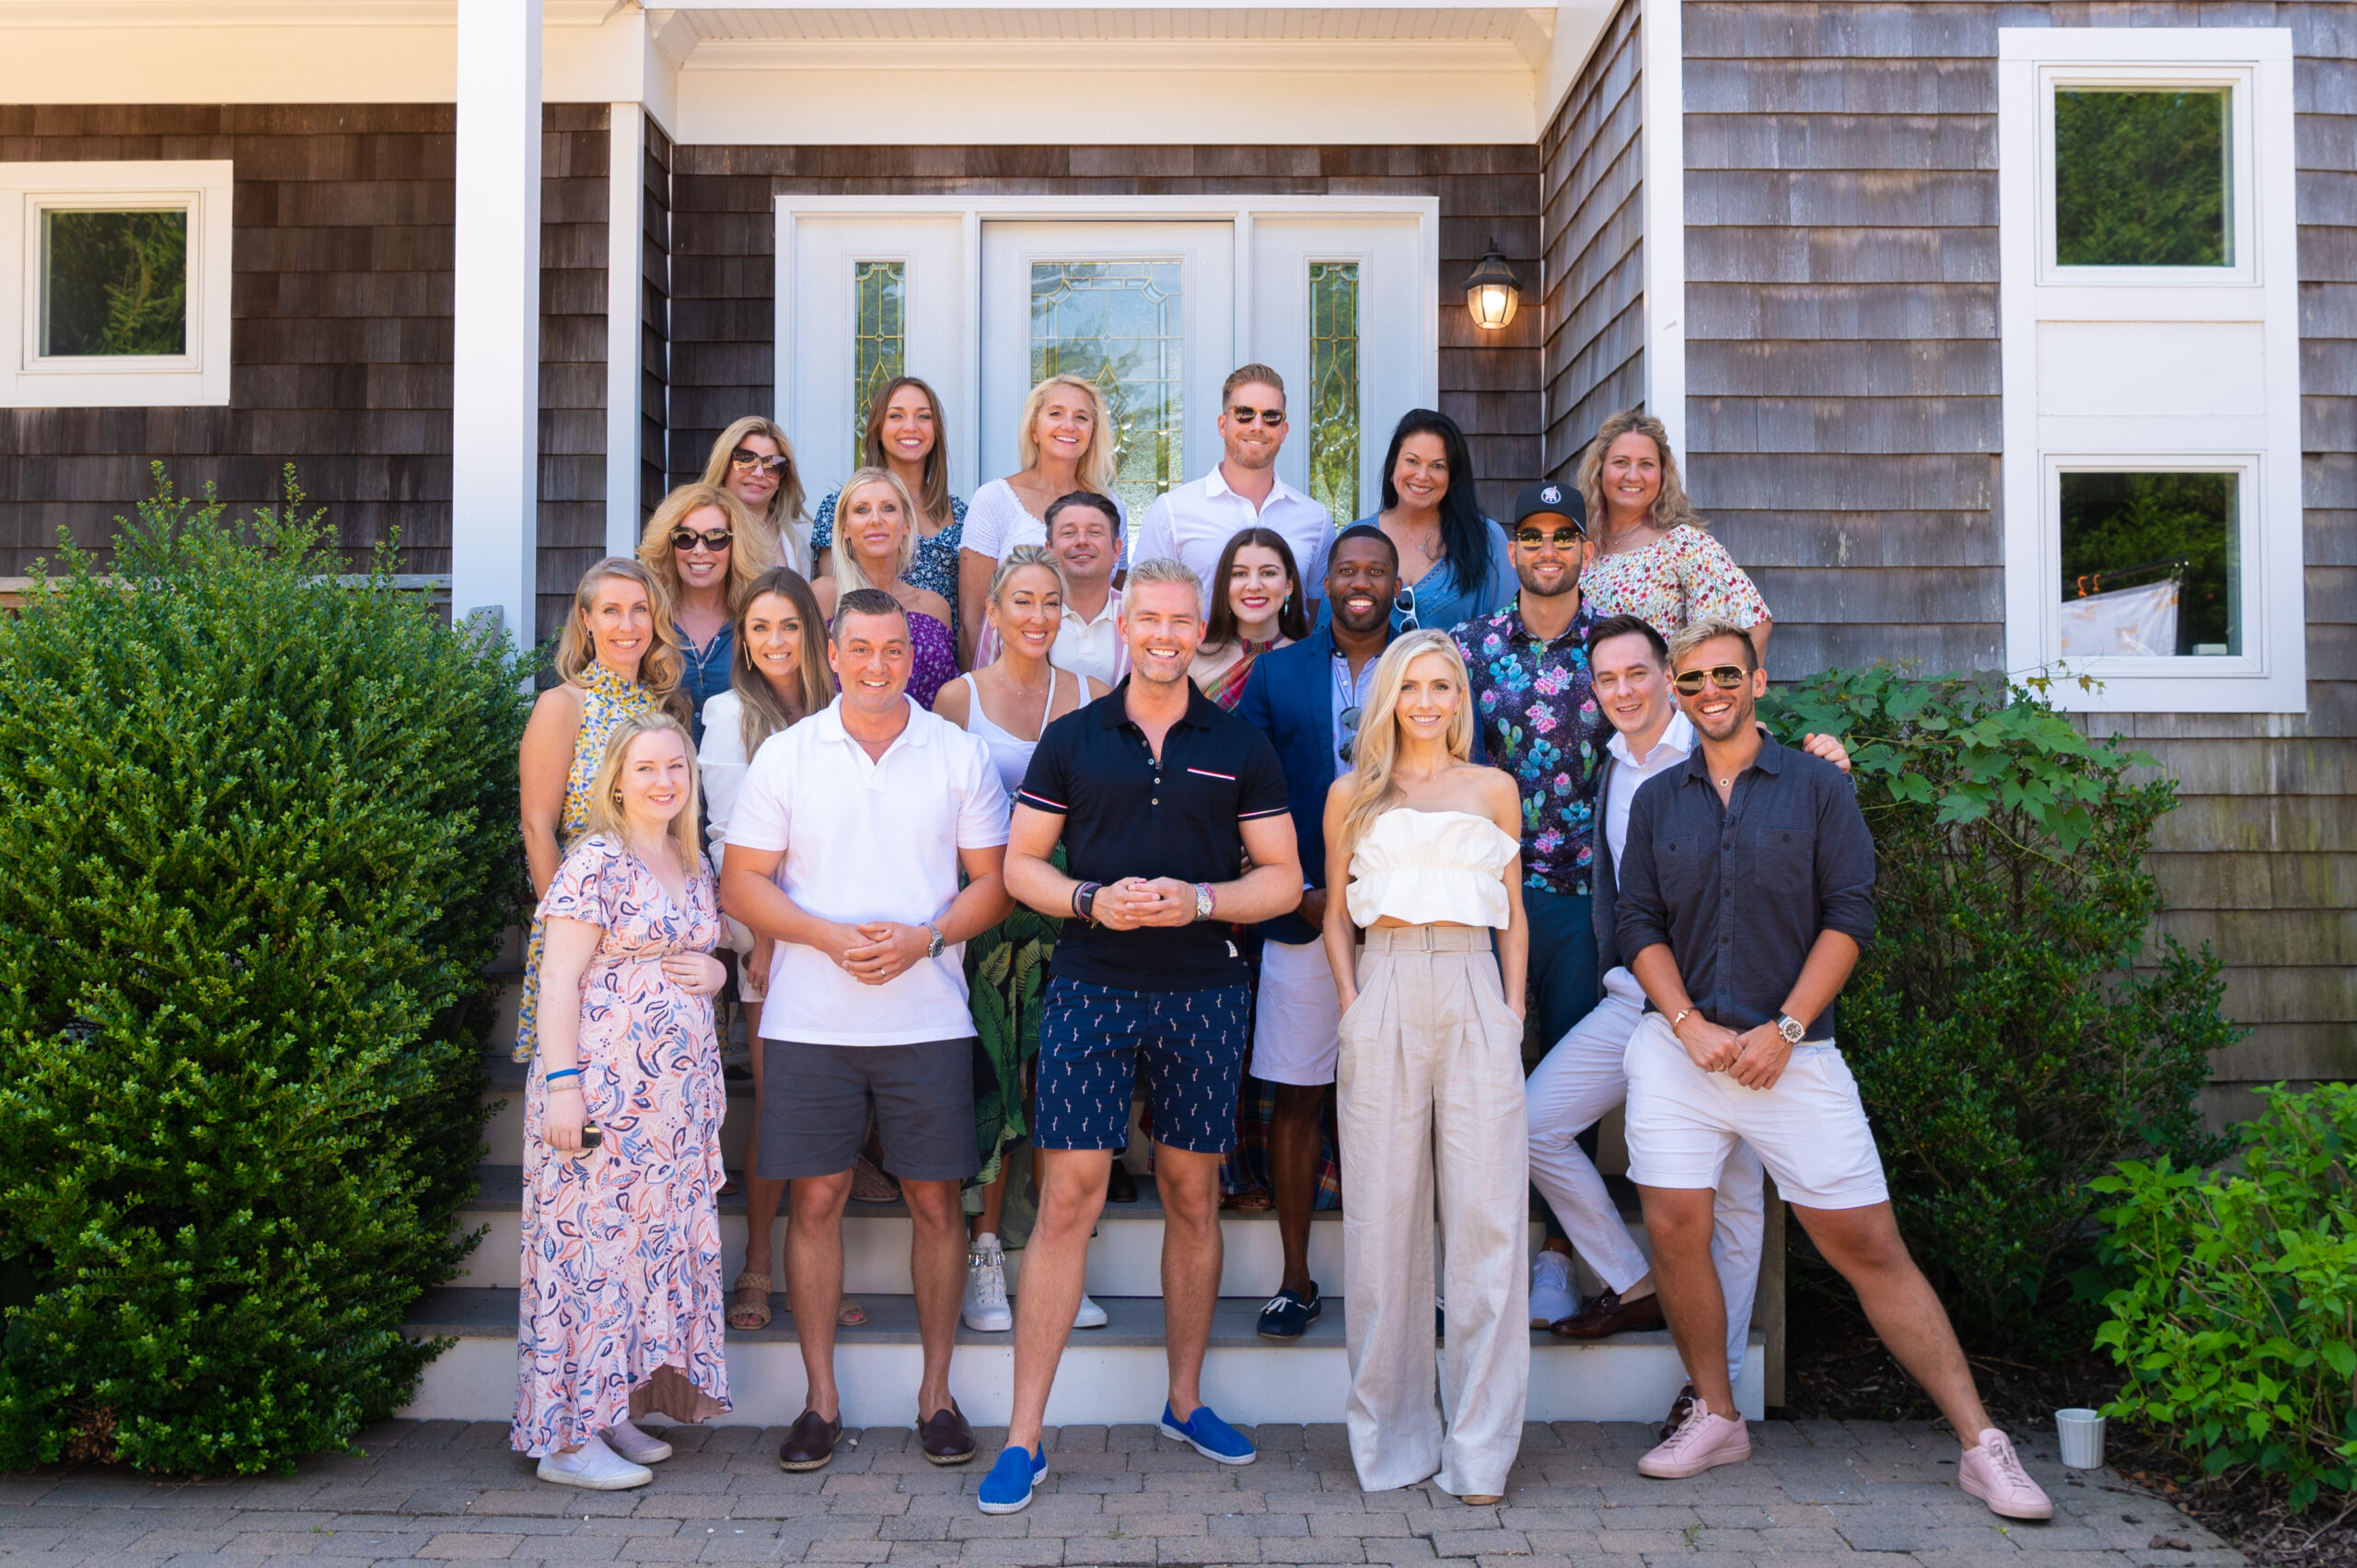 Ryan Serhant, Taylor Middleton and Tyler Whitman, along with President of SERHANT. Ventures Kyle Scott and attendees of the Mastermind Hamptons experience.   